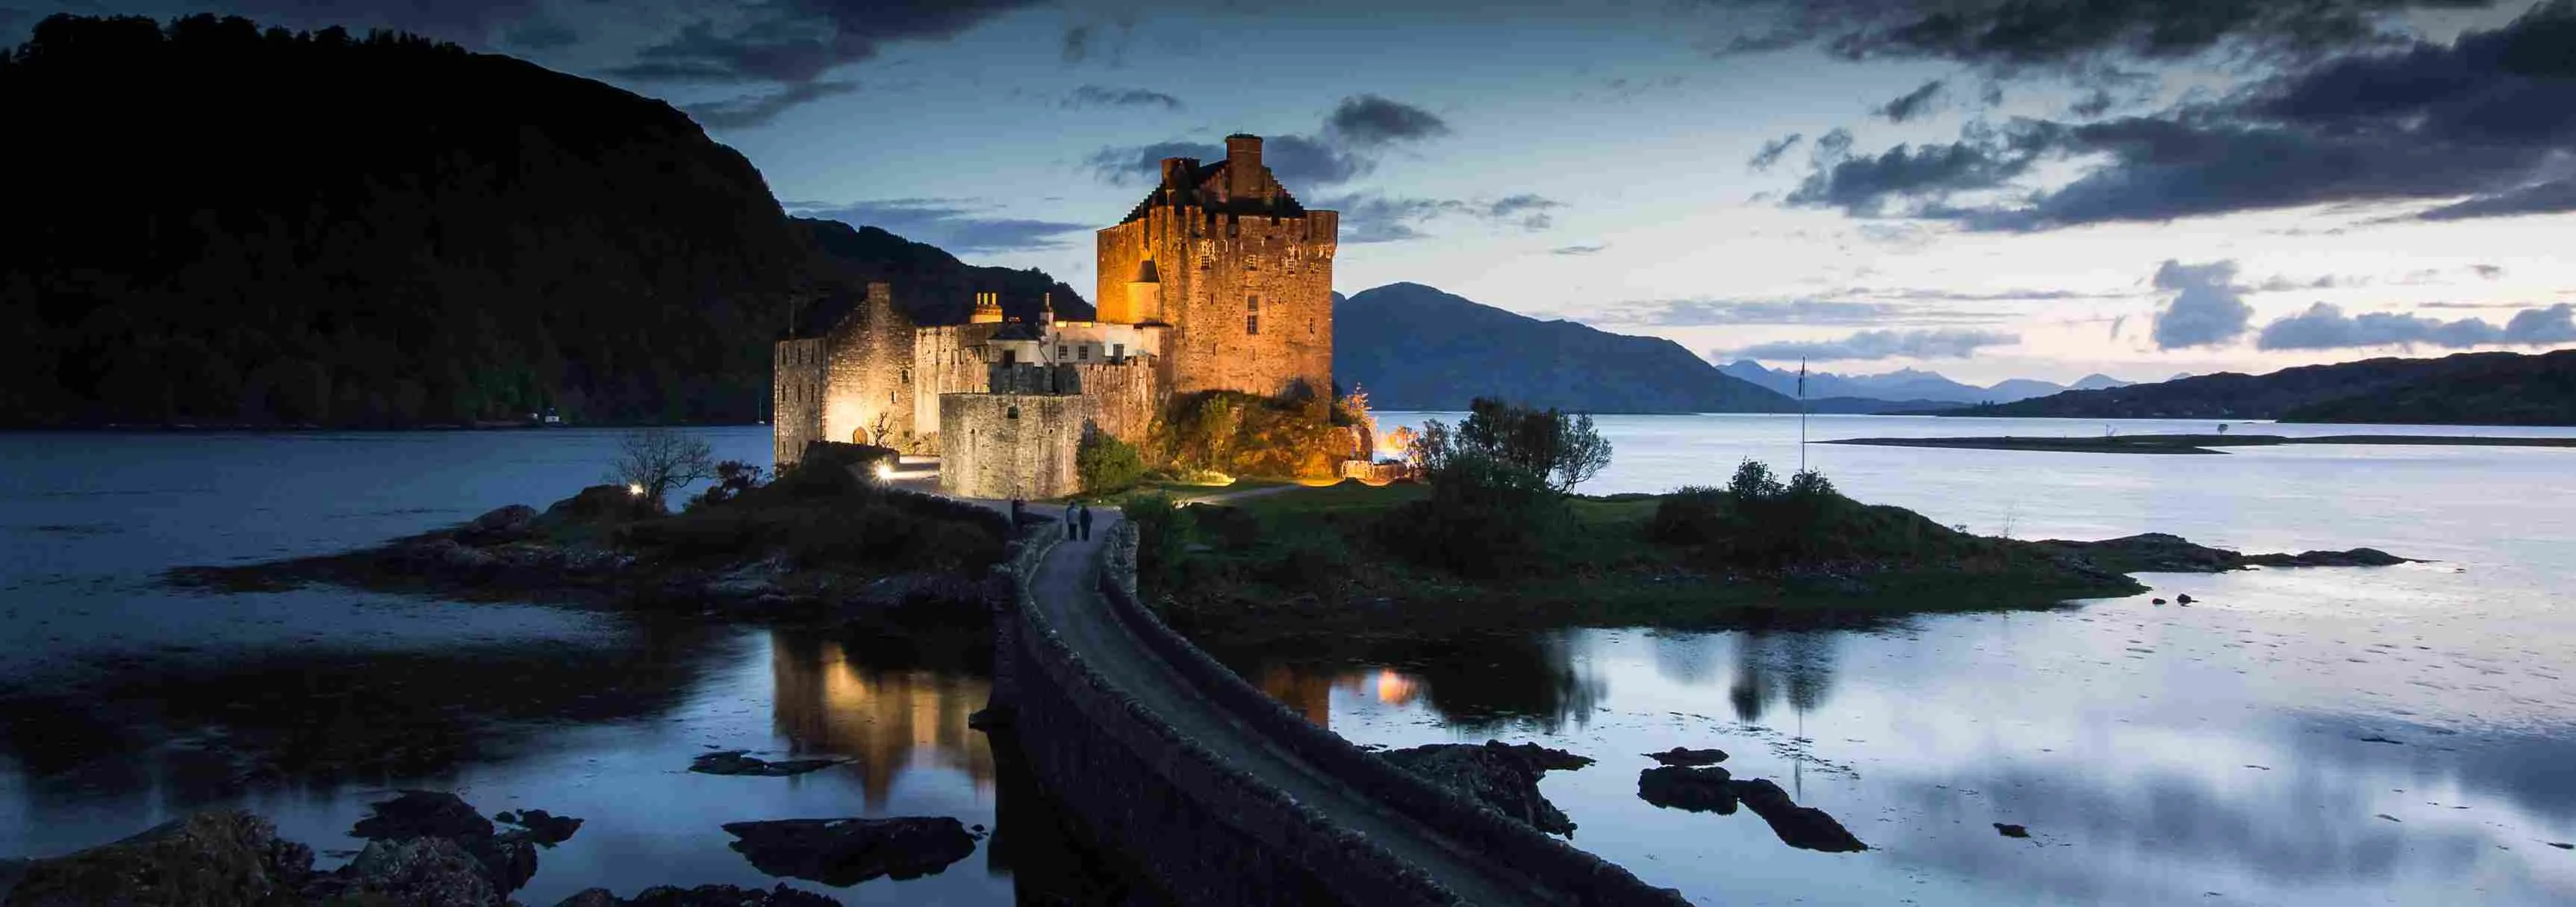 Visit the most photographed castle in Scotland as you drive past Loch Ness. Get Eilean Donan Castle Scotland tickets today.